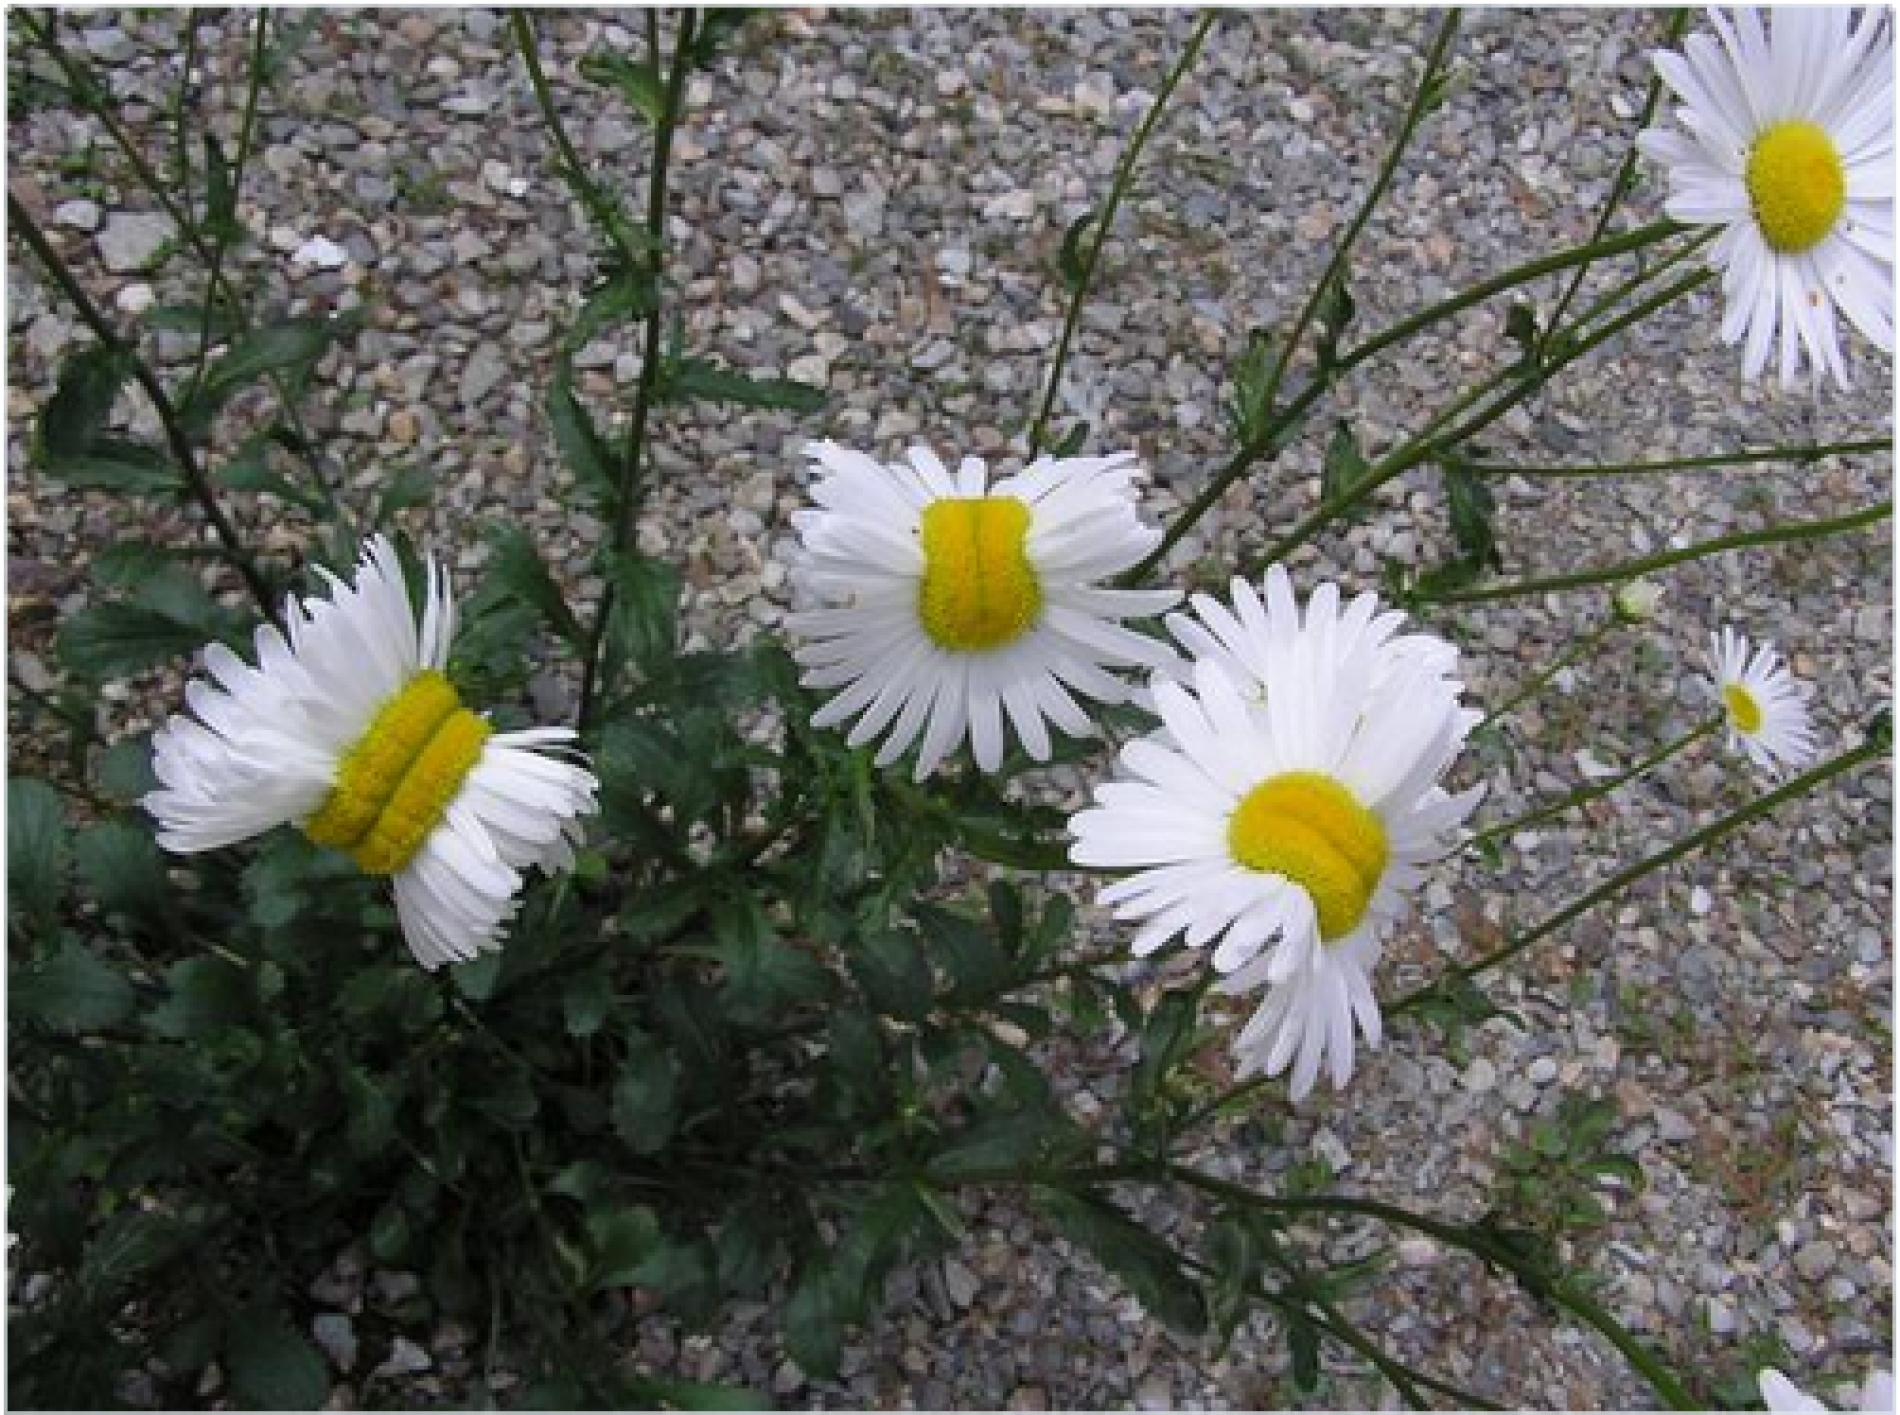 Are 'Mutated' Daisies Really Caused by Fukushima Radiation?